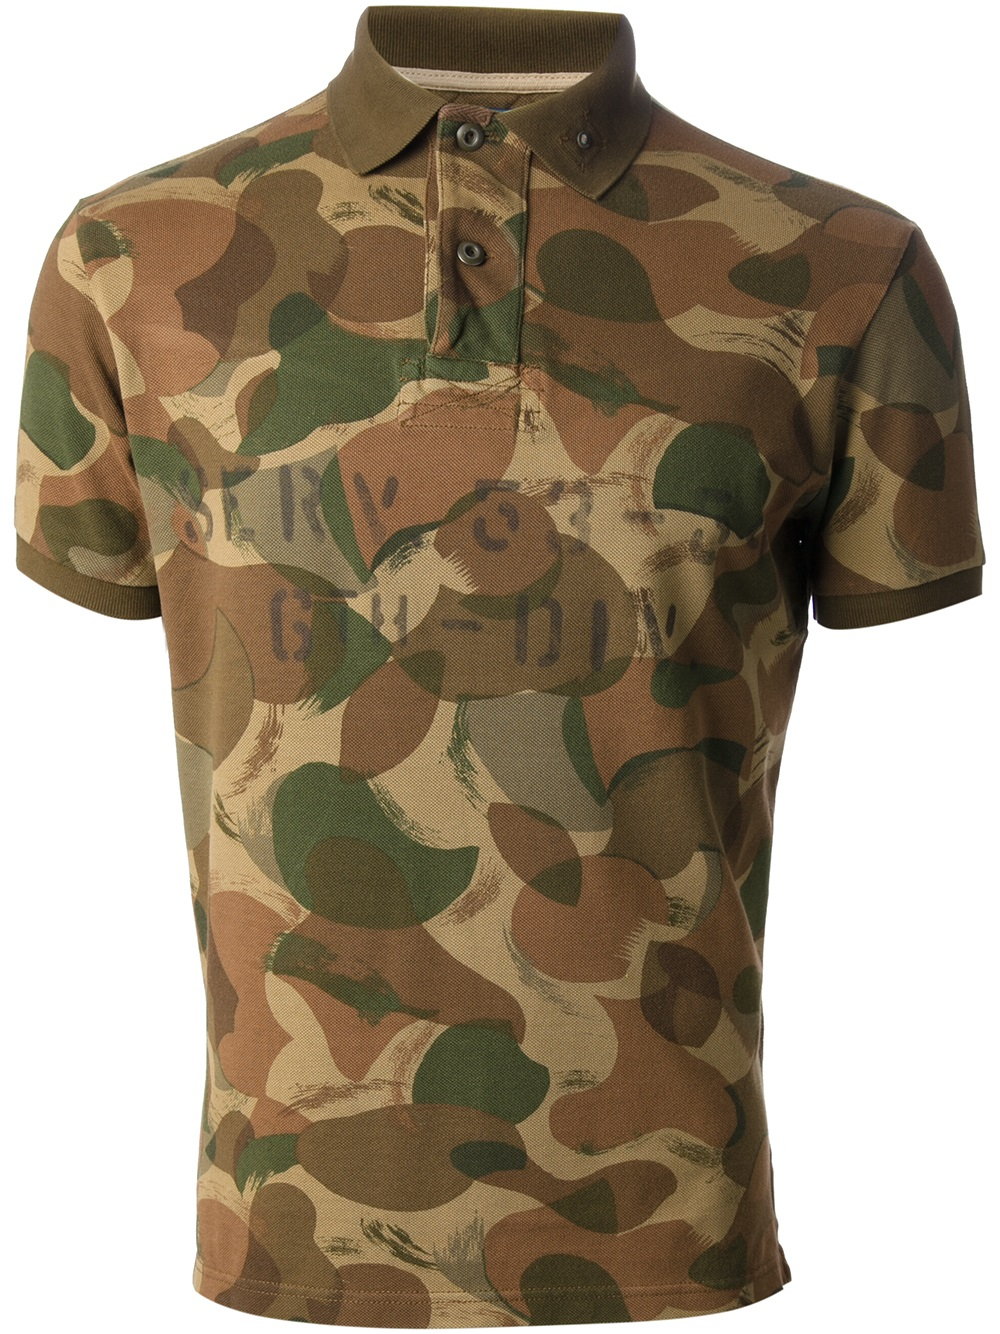 Lyst - Polo Ralph Lauren Camouflage Polo Shirt in Brown for Men